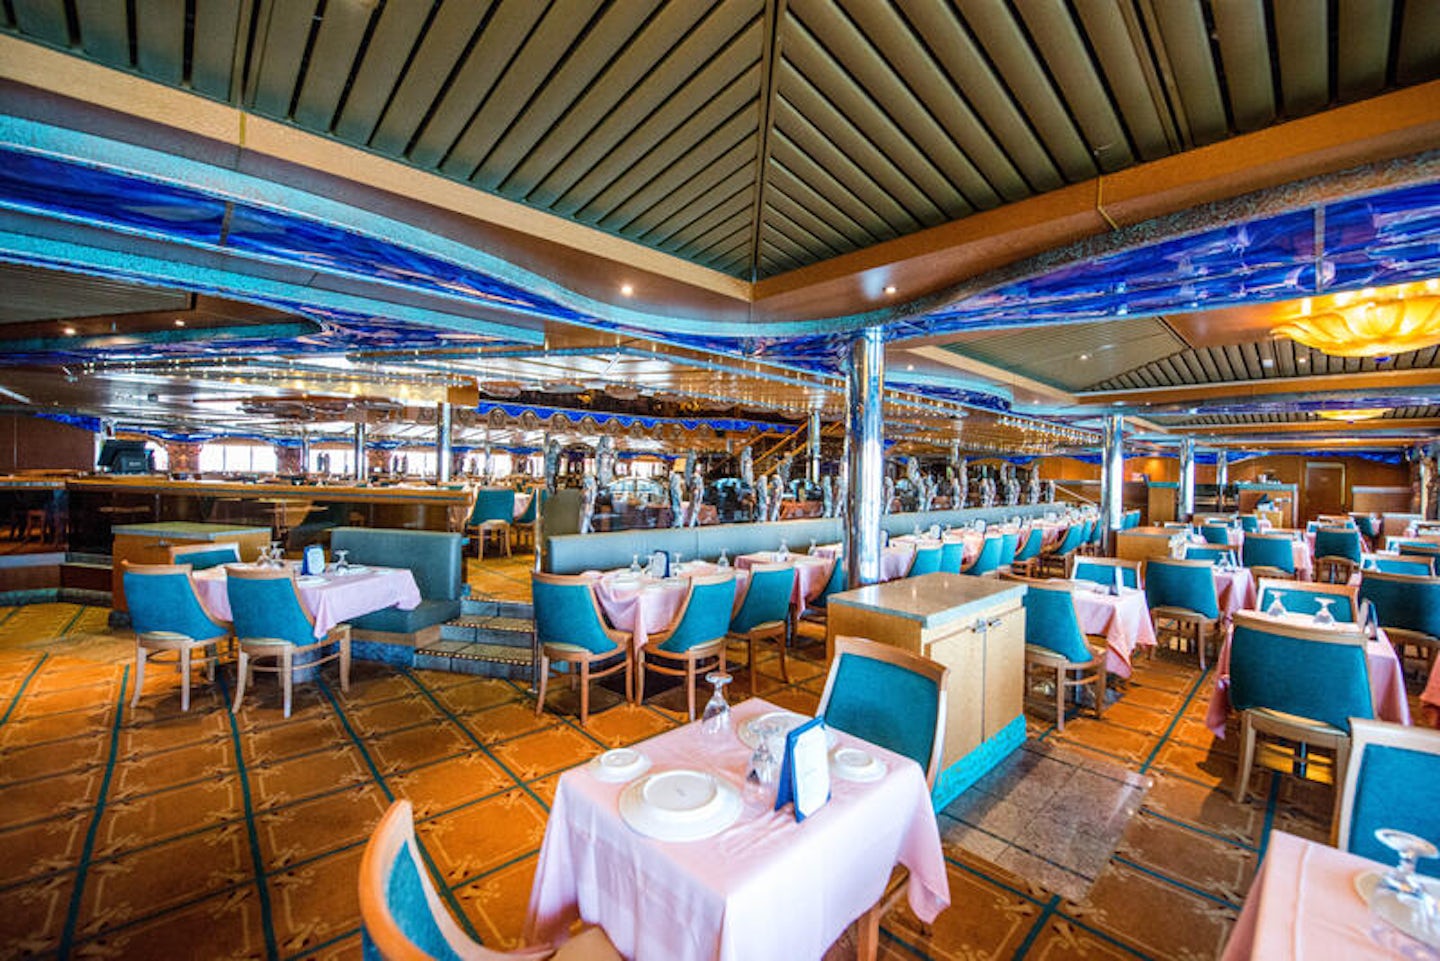 Carnival Victory Dining Room Dress Code